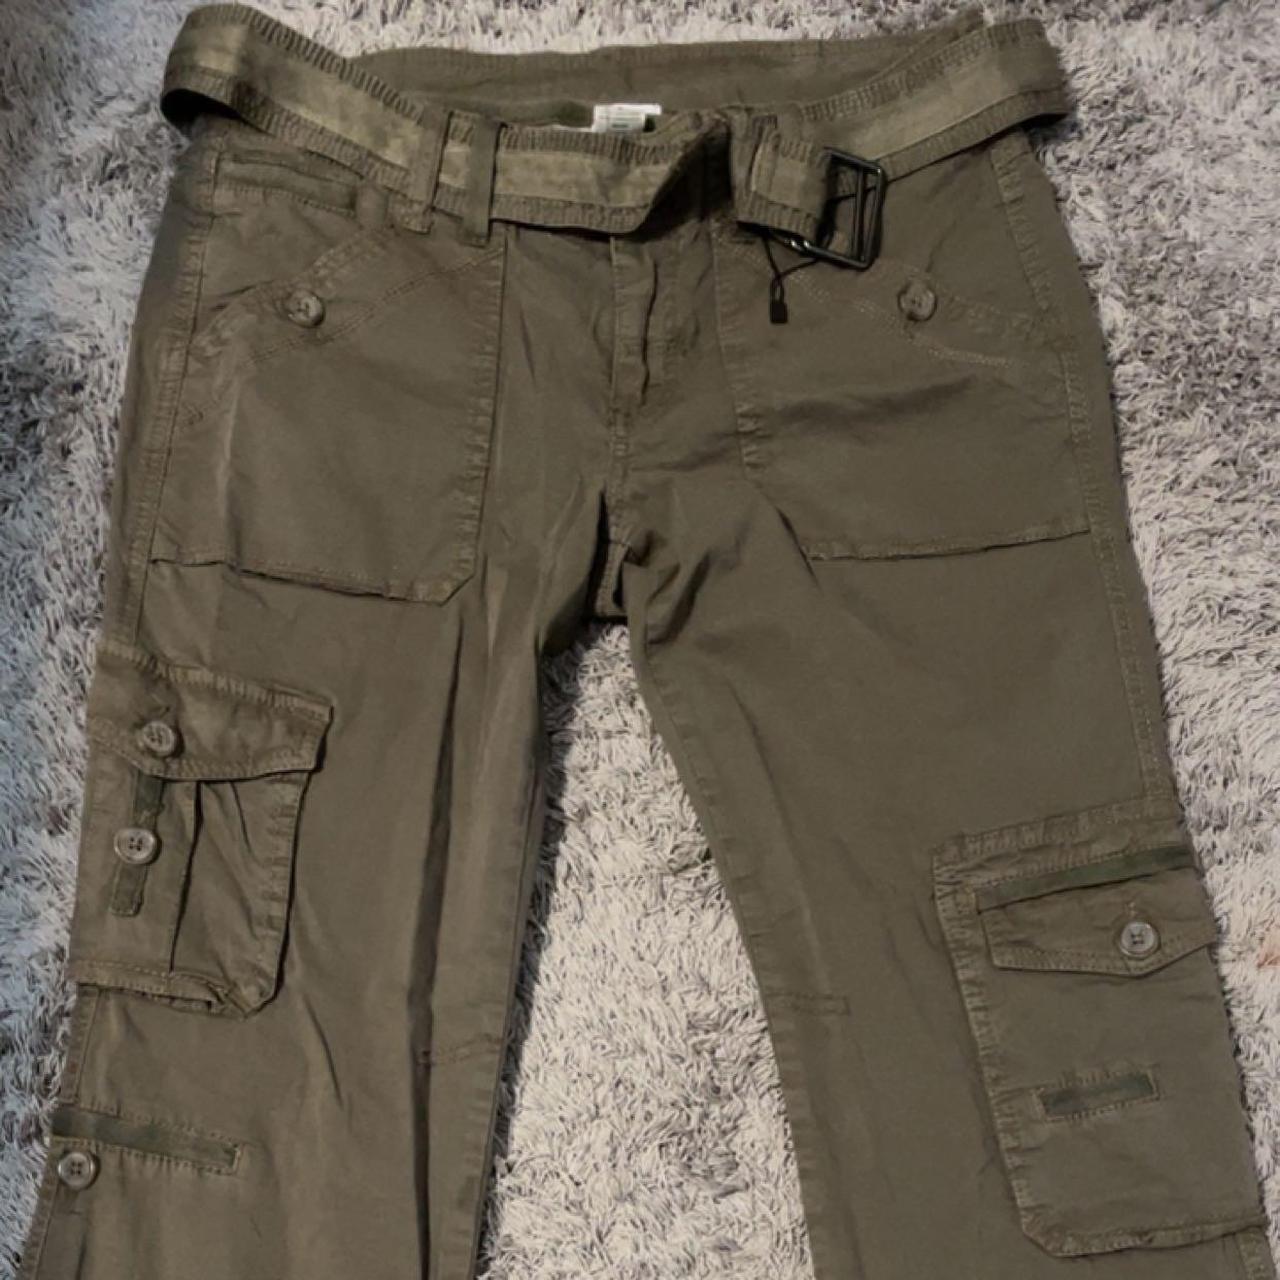 Low rise khaki flared cargos ⭐️ -Only wore once for... - Depop